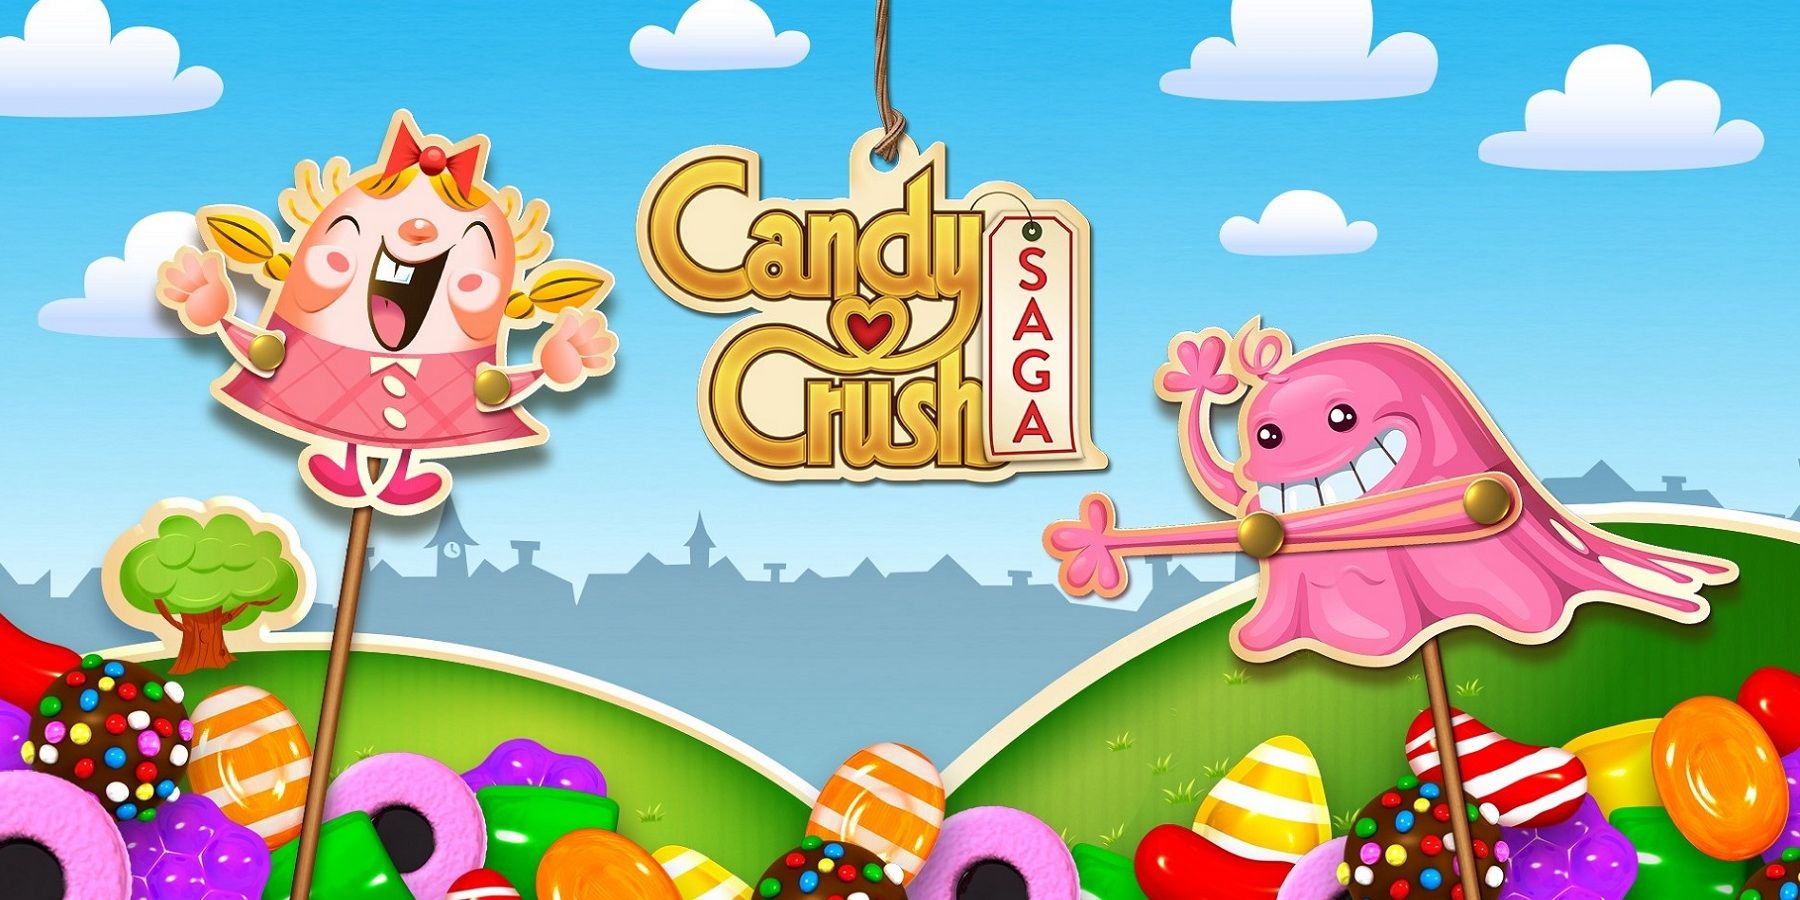 Candy Crush Saga: sweet success for global flavour of the moment, Games